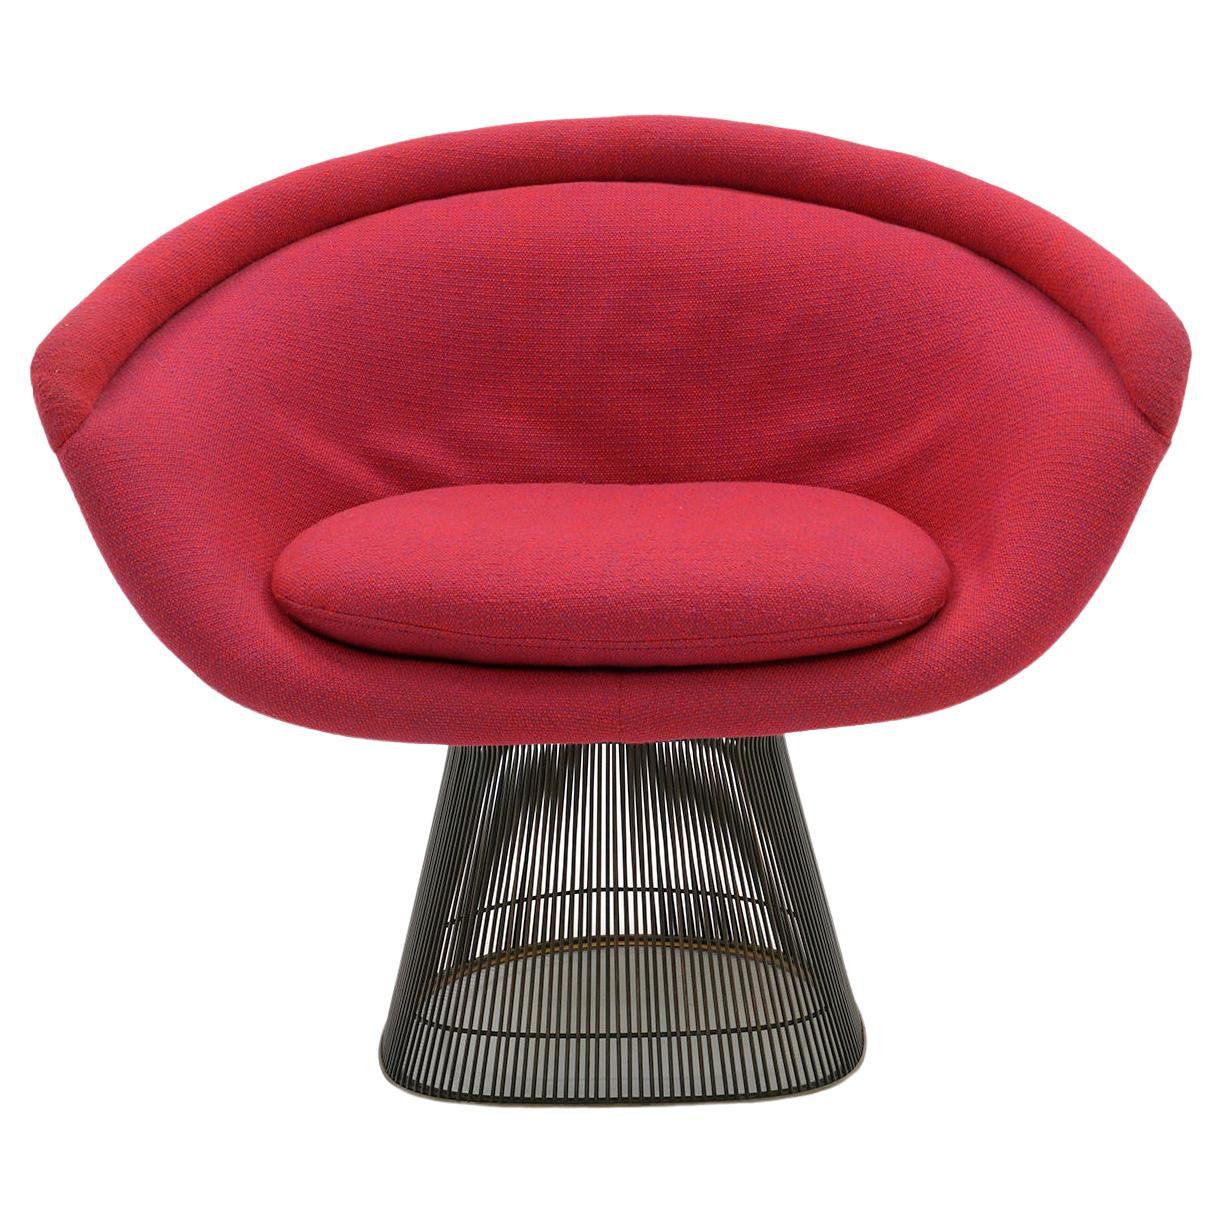 Warren Platner for Knoll Lounge Chair. Red Fabric, Bronze Frame Finish